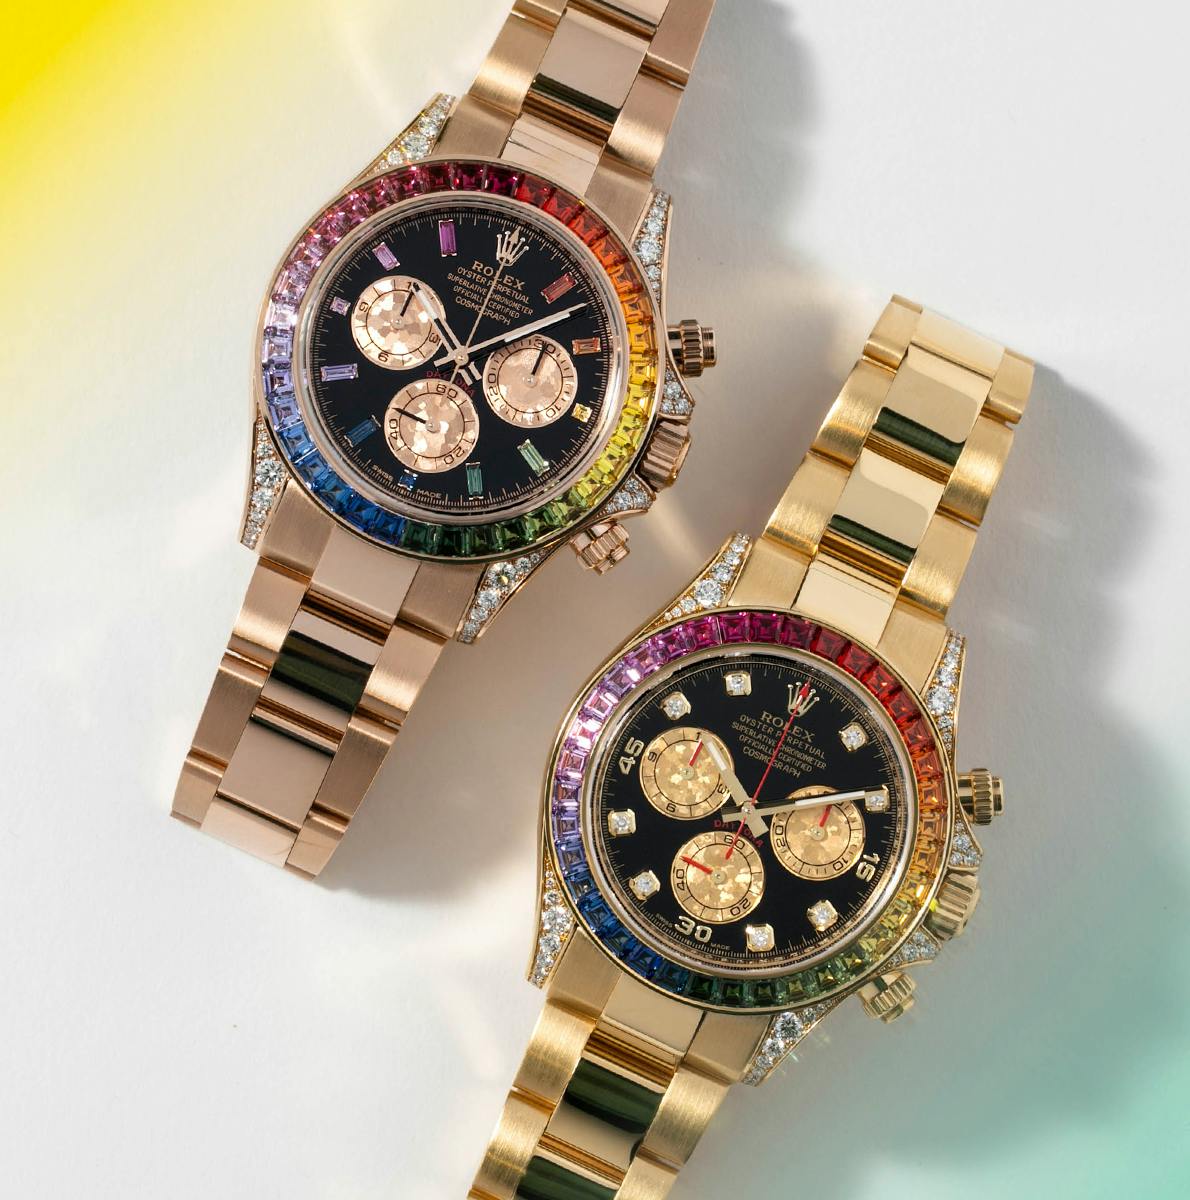 A side-by-side photograph of the Rolex Rainbow Daytona watch in Everose and Yellow, comparing the colorful baguet gem indices of the Everose model.